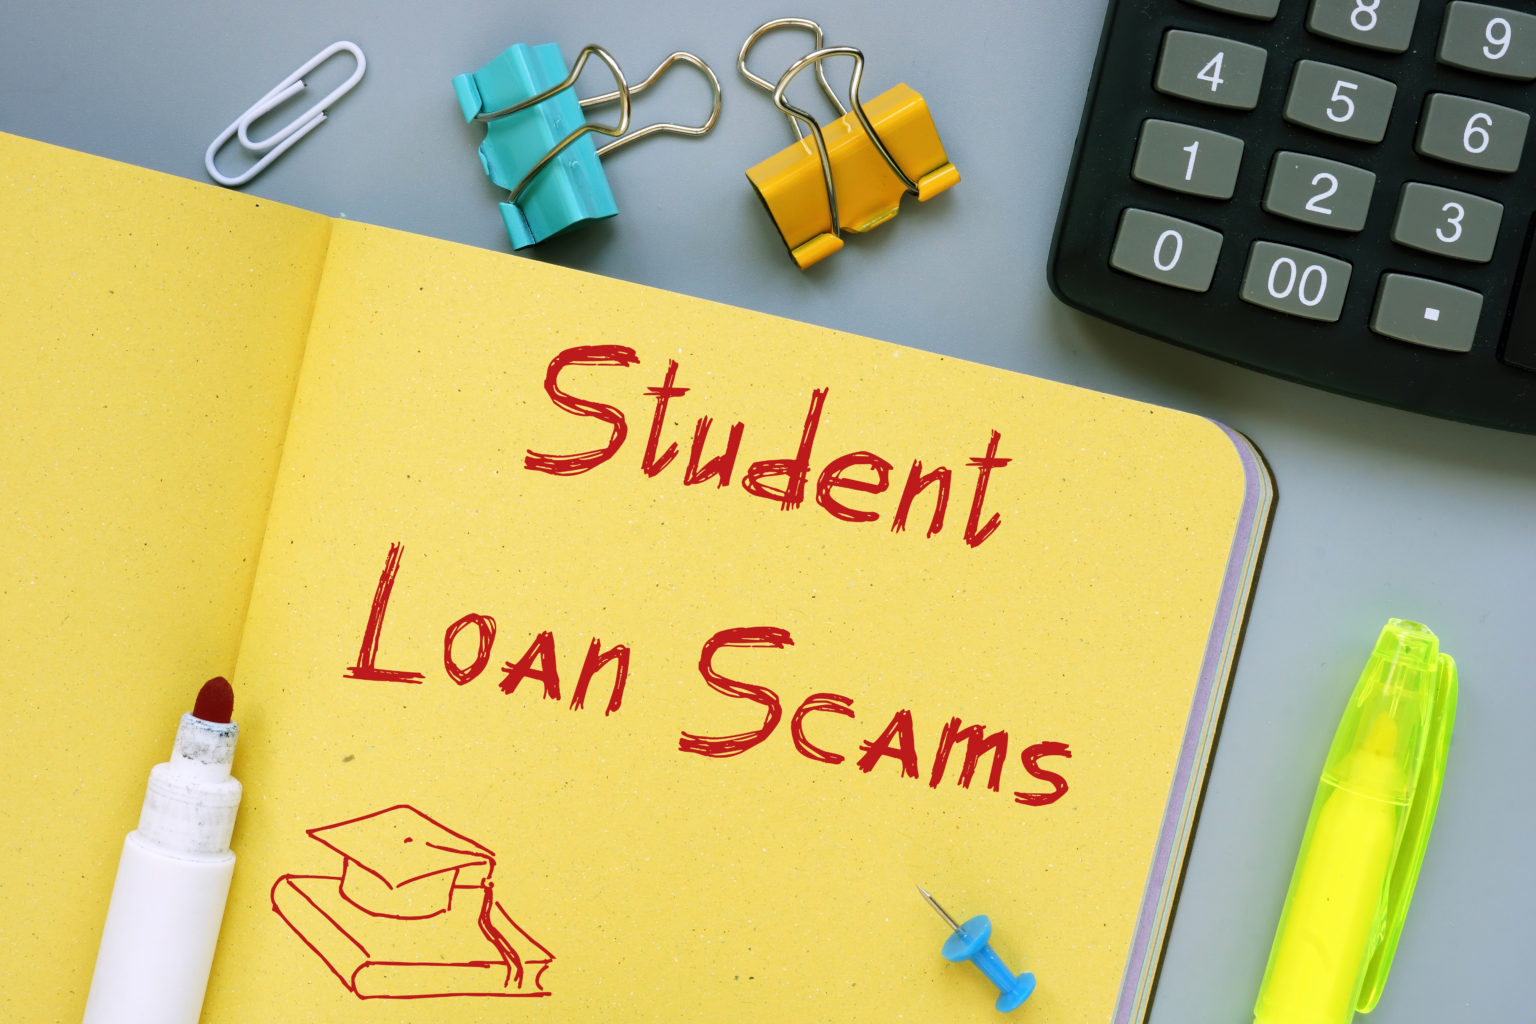 Student Loan Scams - What You Need to Know - CU of Georgia